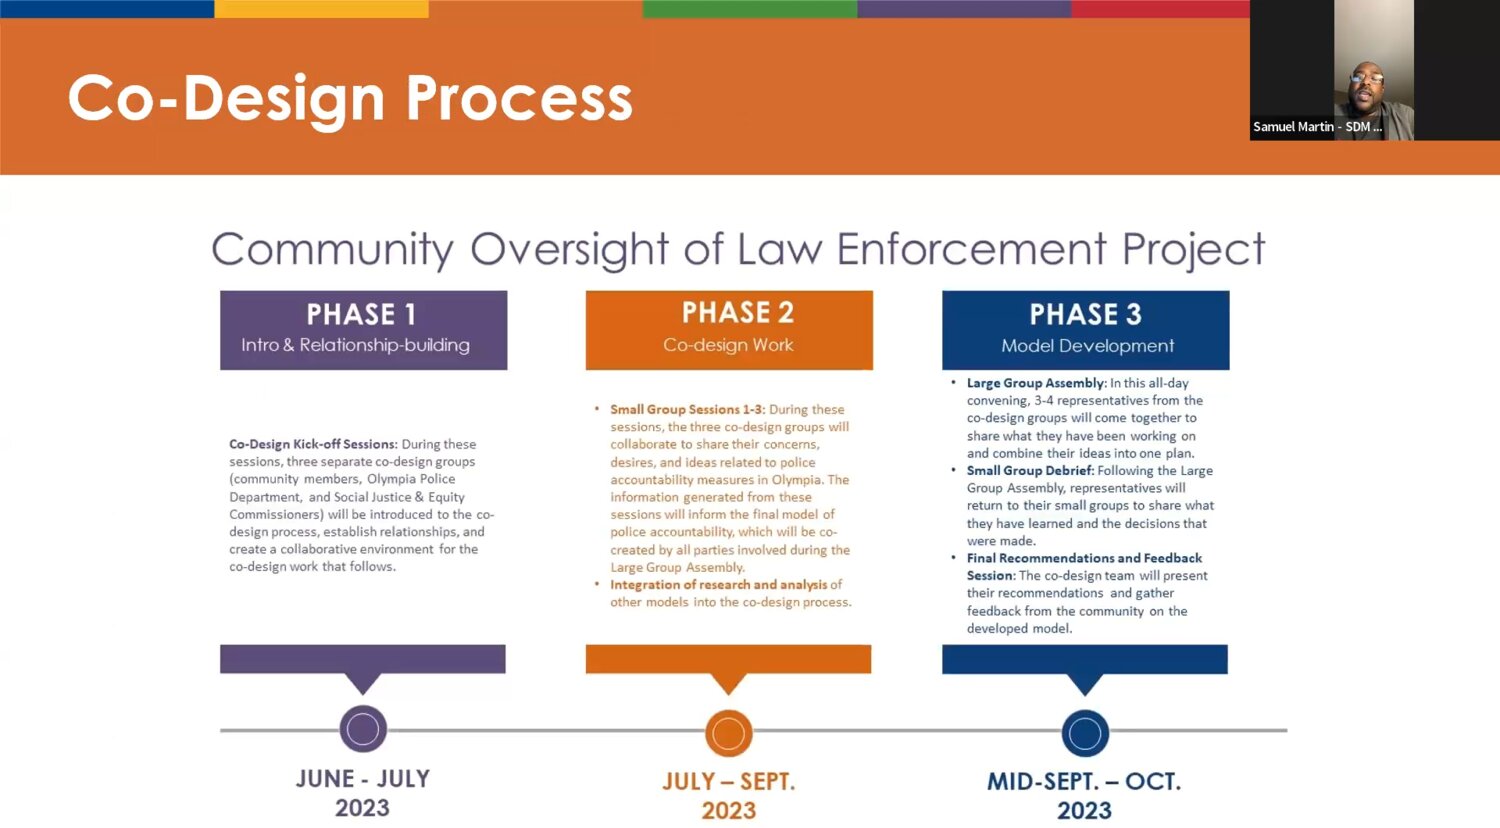 Sam Martin of SDM Consulting discussed the process and timeline of the Community Oversight of Law Enforcement project at the Community Livability and Public Safety meeting on May 24, 2023.